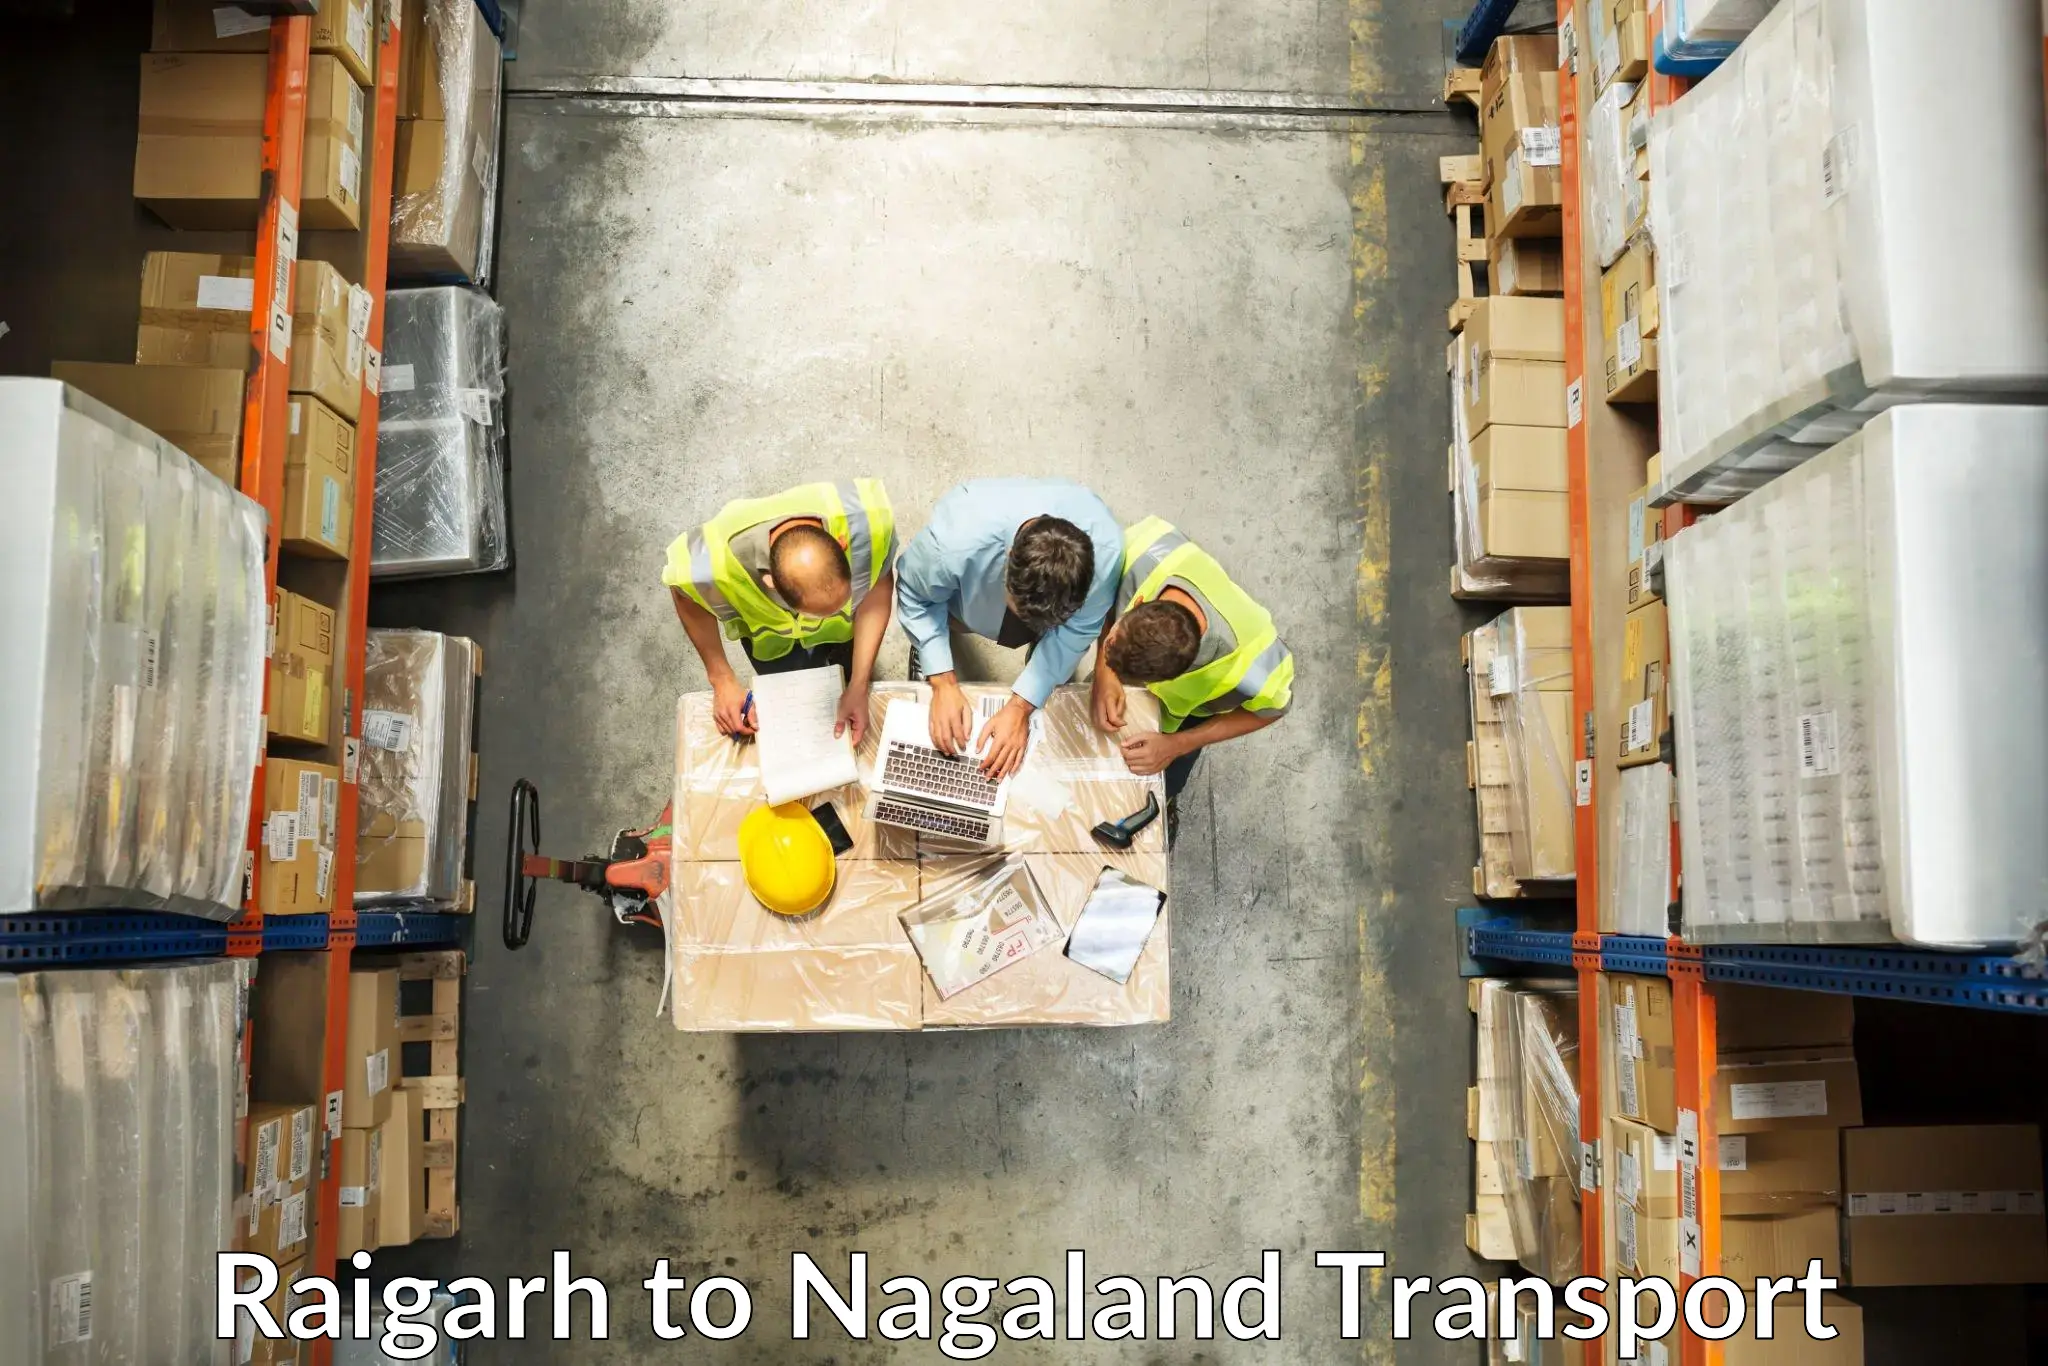 Truck transport companies in India Raigarh to Nagaland